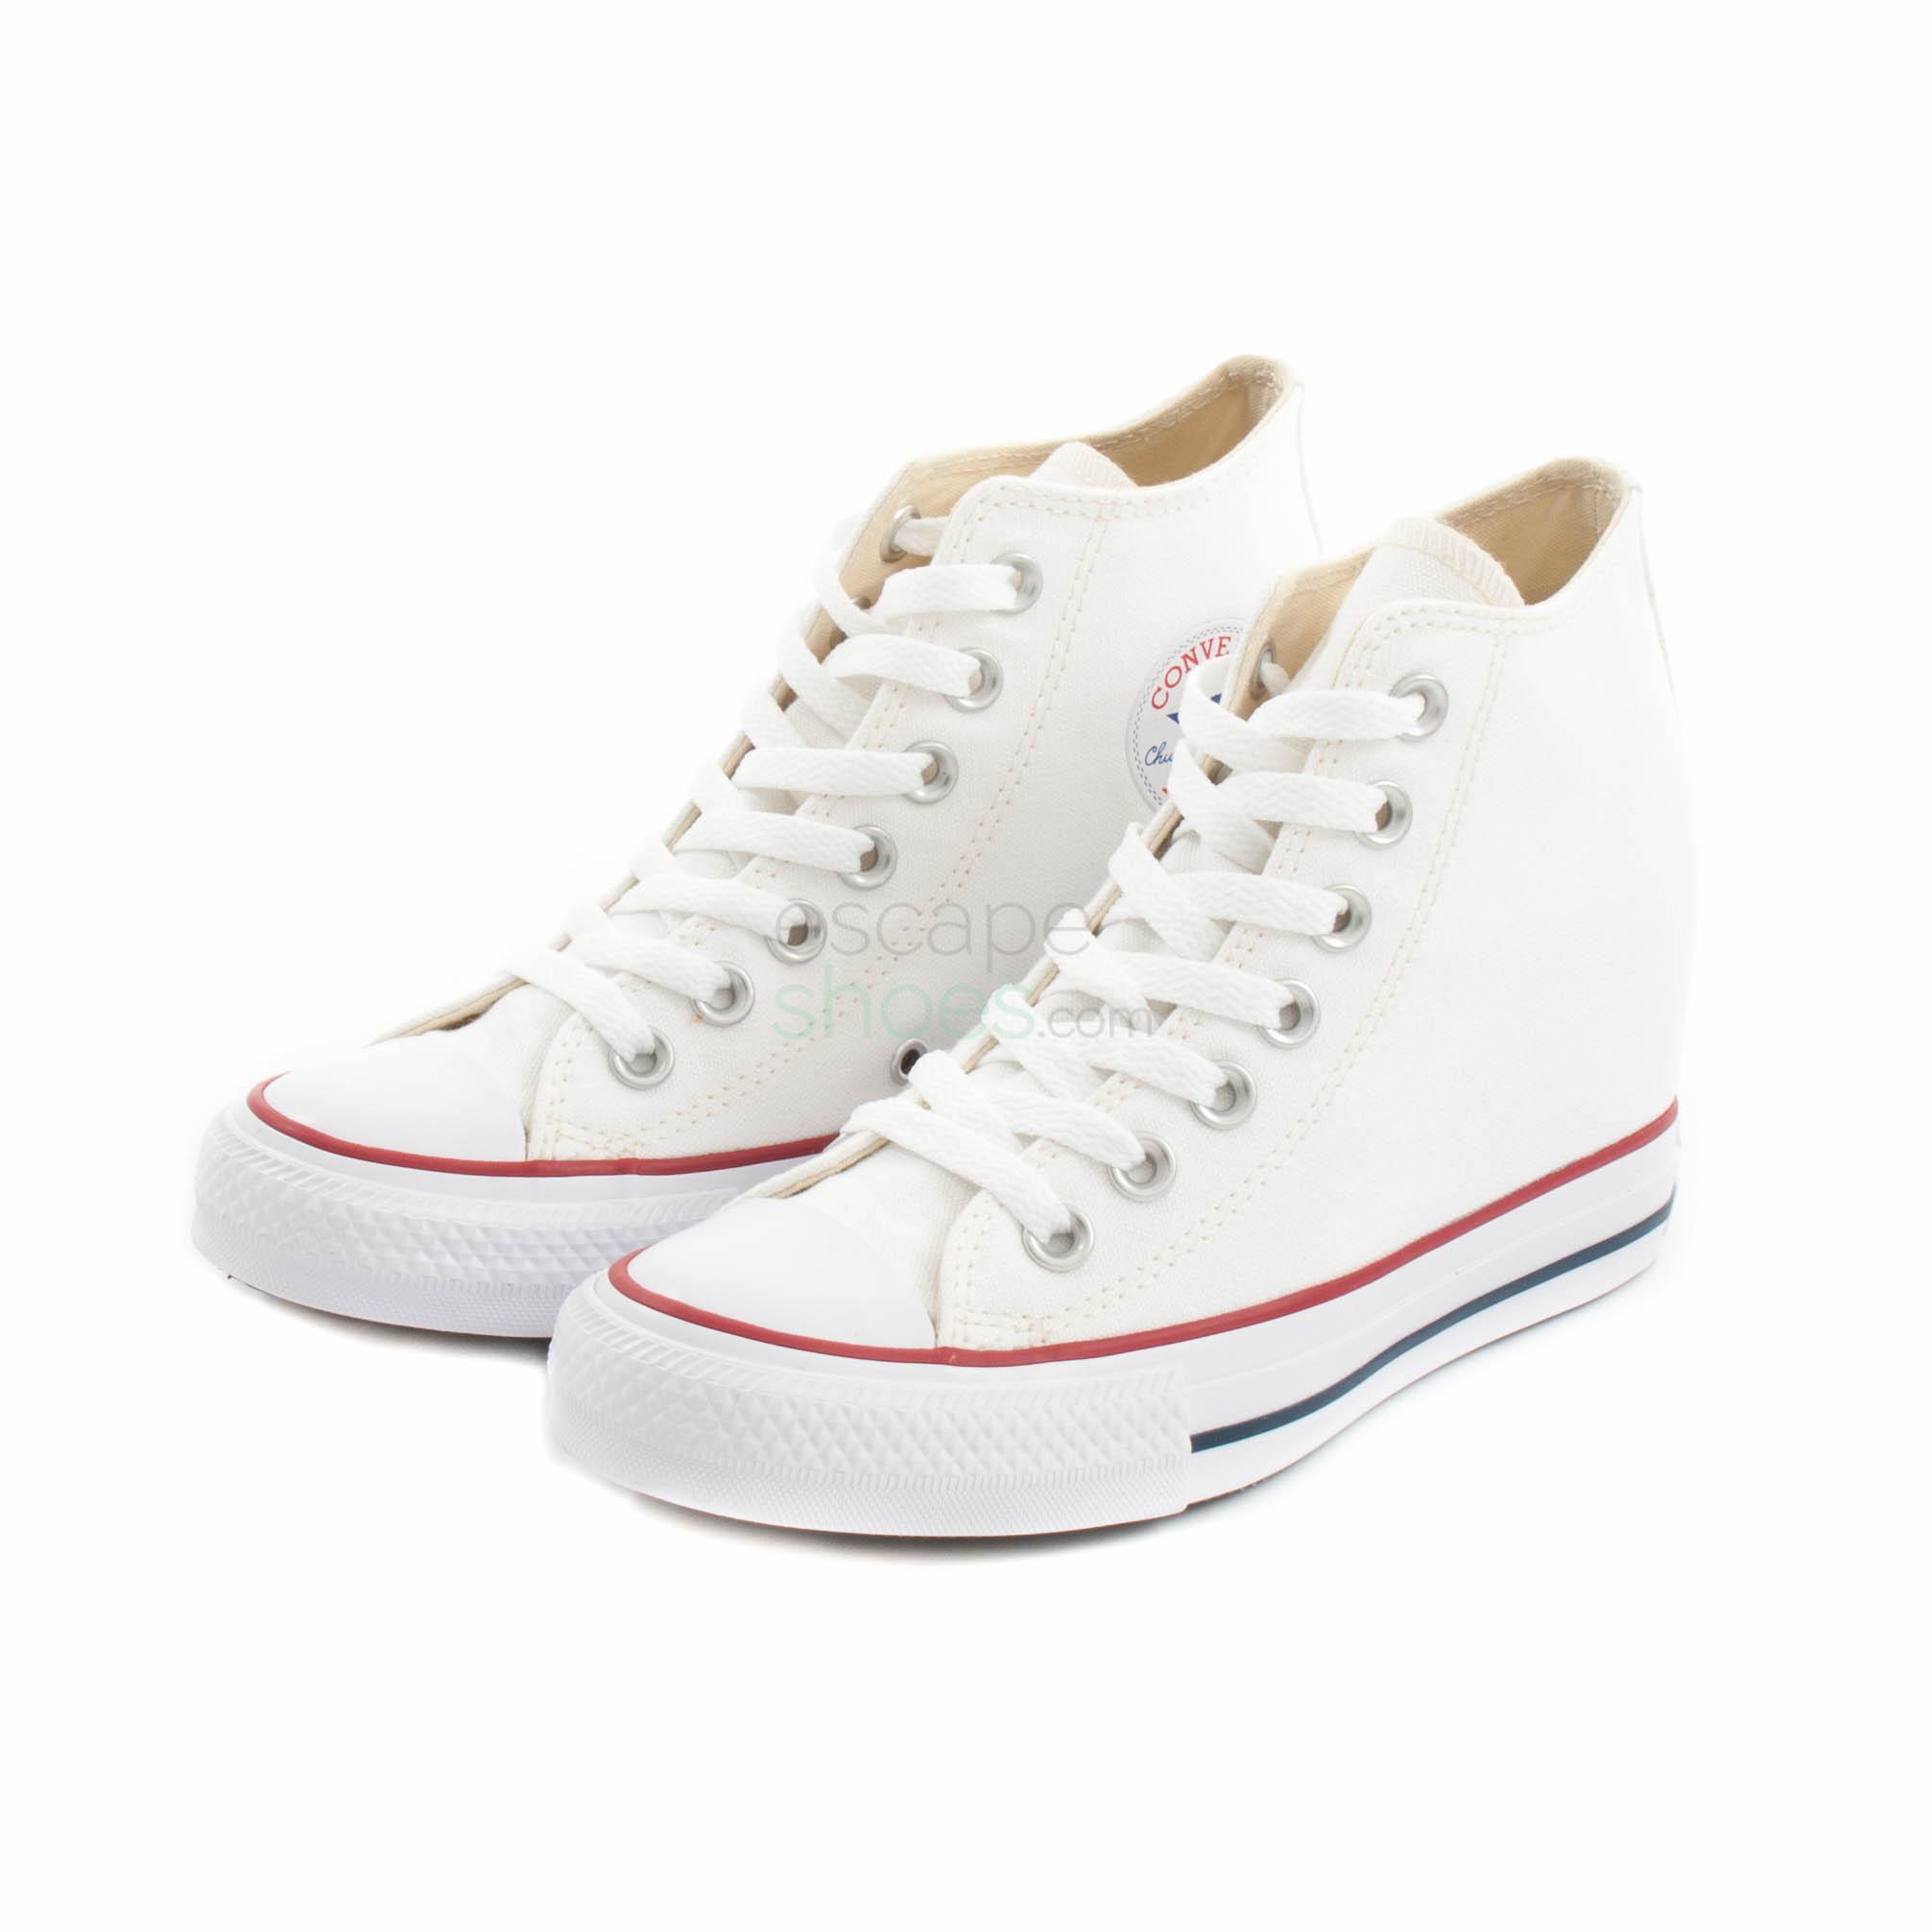 converse all star lux